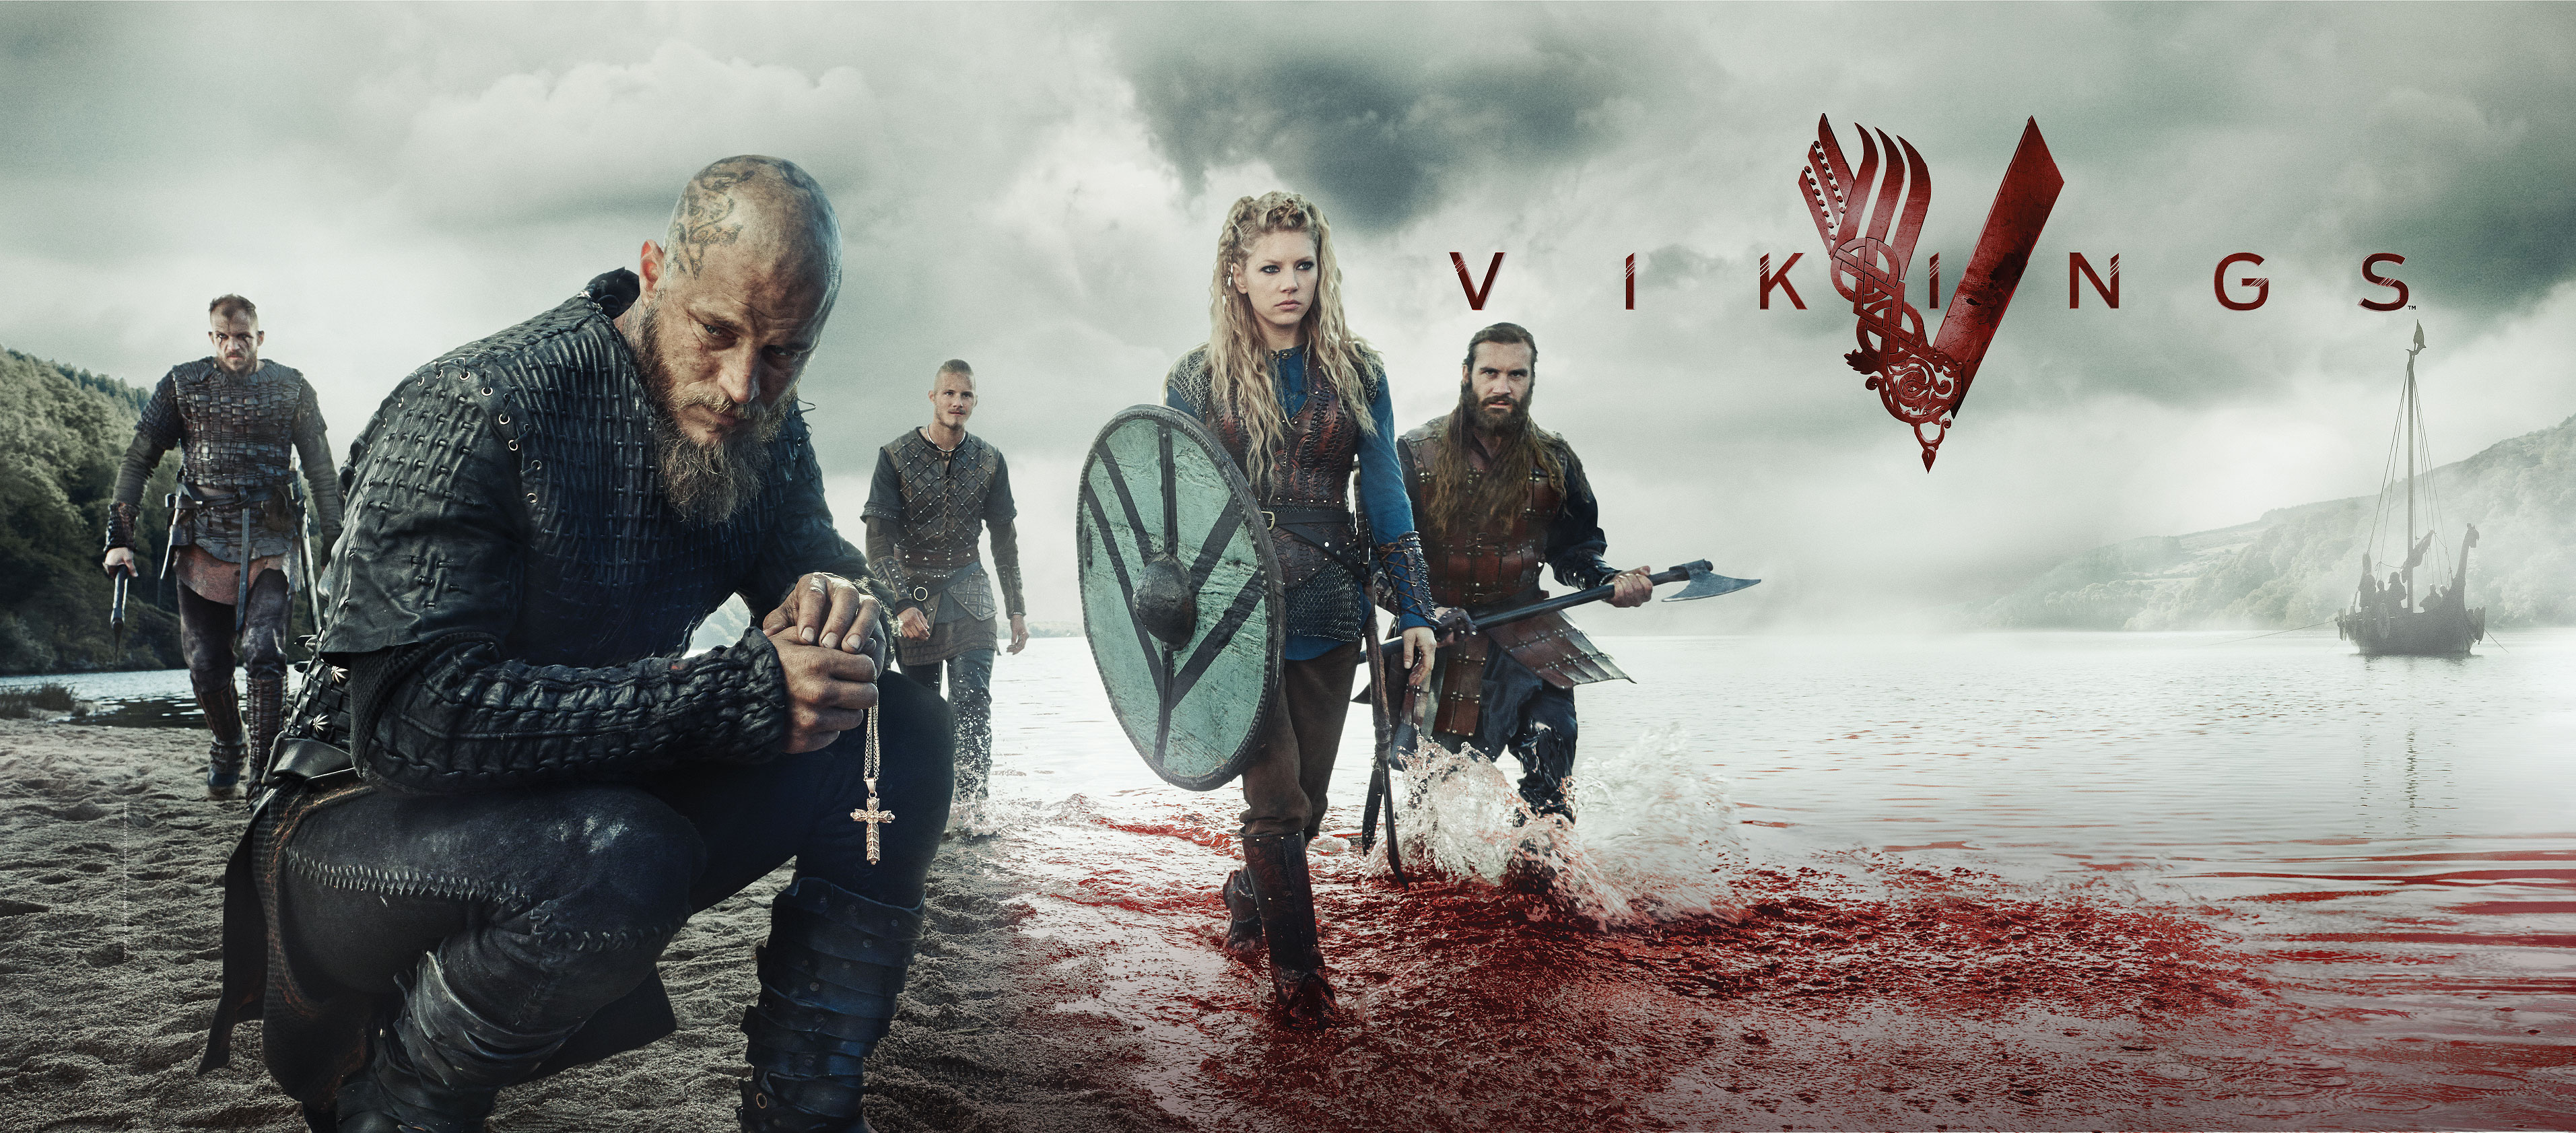 Wallpapers vikings TV show movies on the desktop